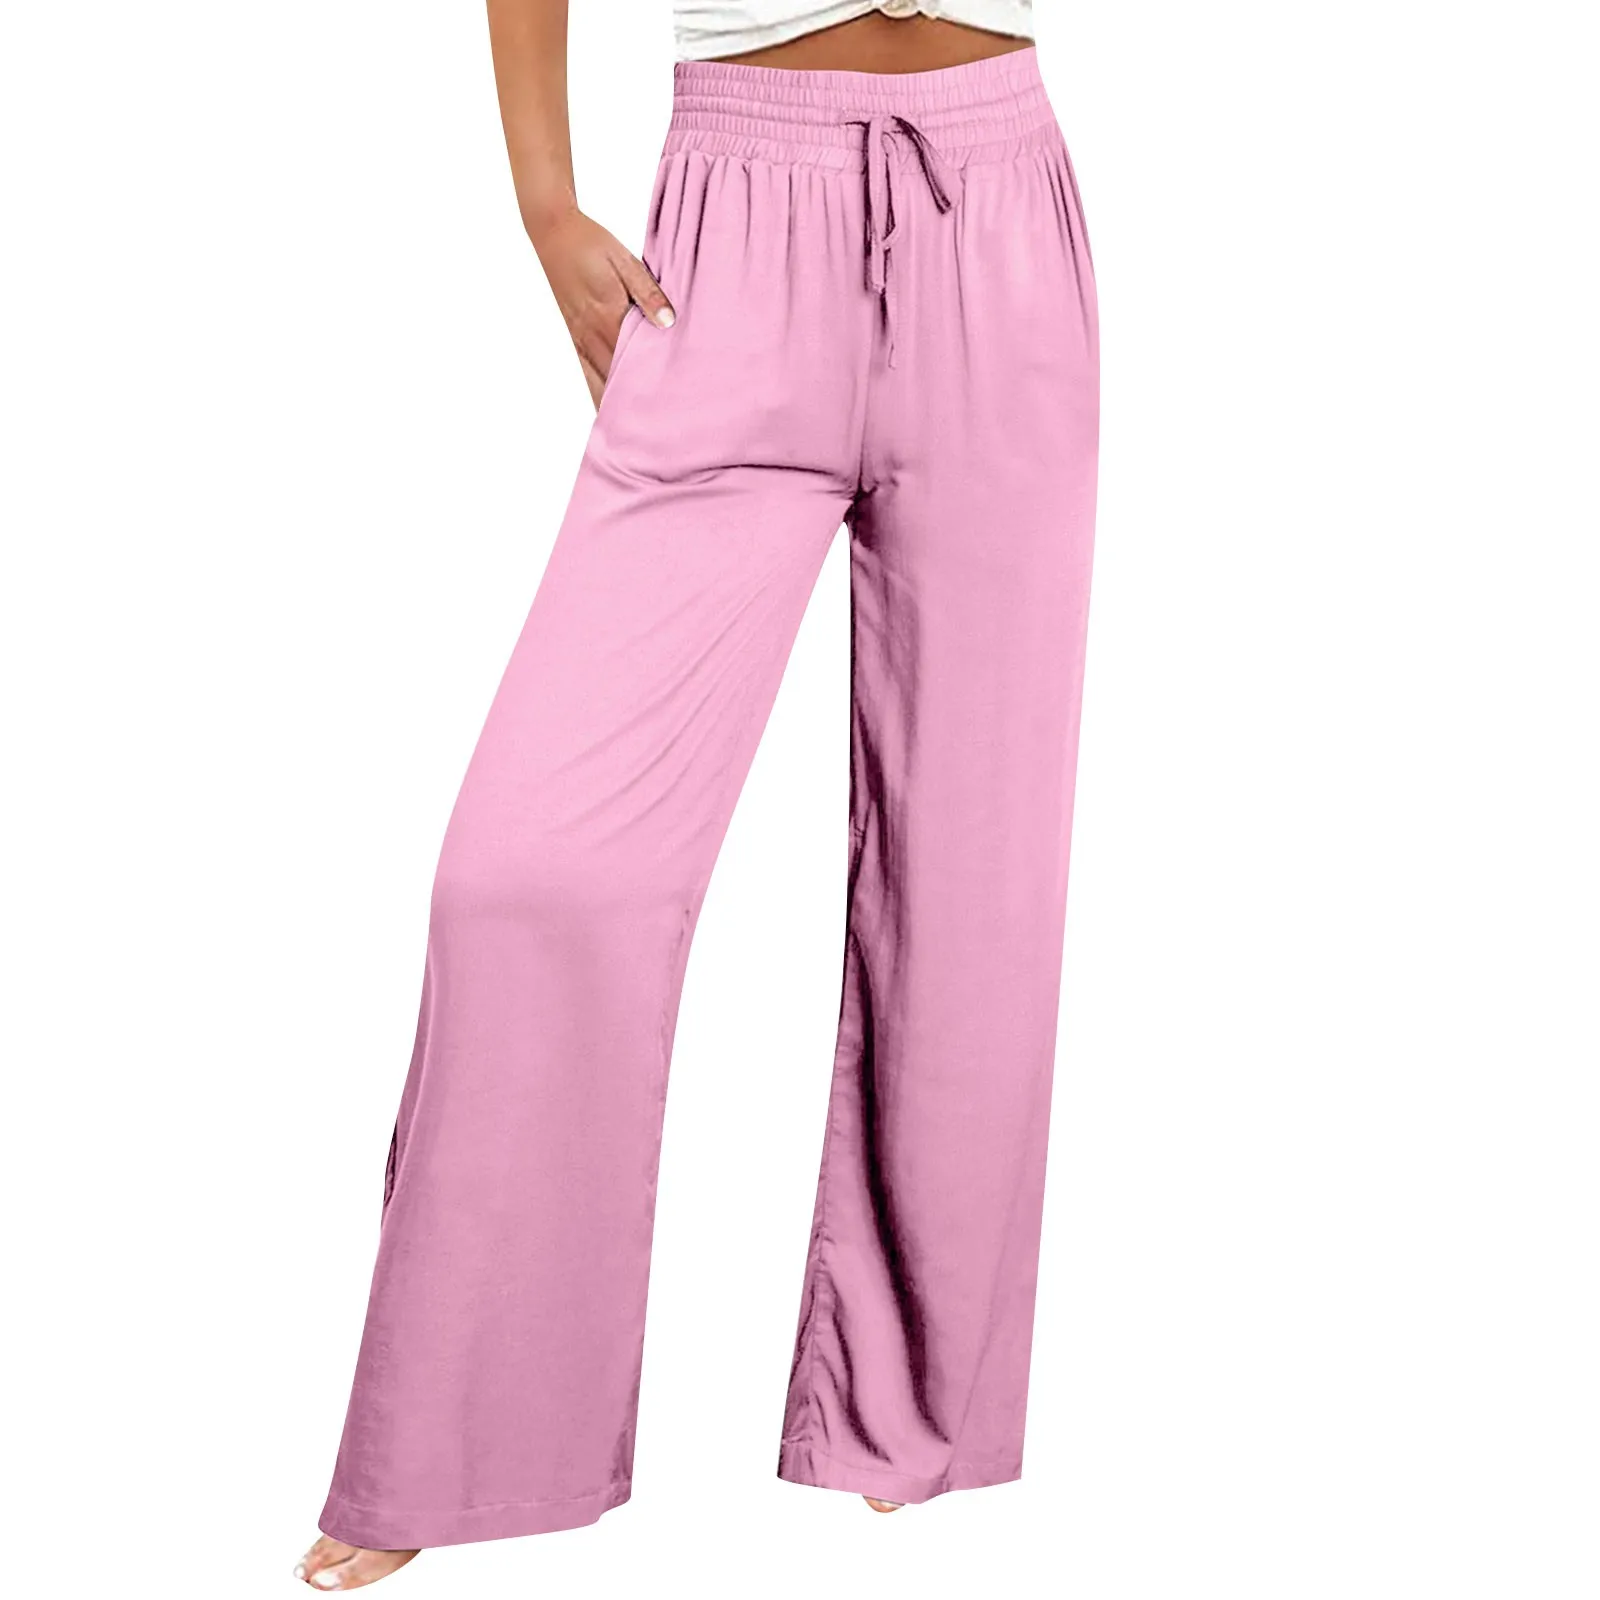 

Pants For Women Palazzo Pants Summer Printed Cropped Cotton Linen Comfy Baggy Trousers With Pockets Fashion Elegant Party High